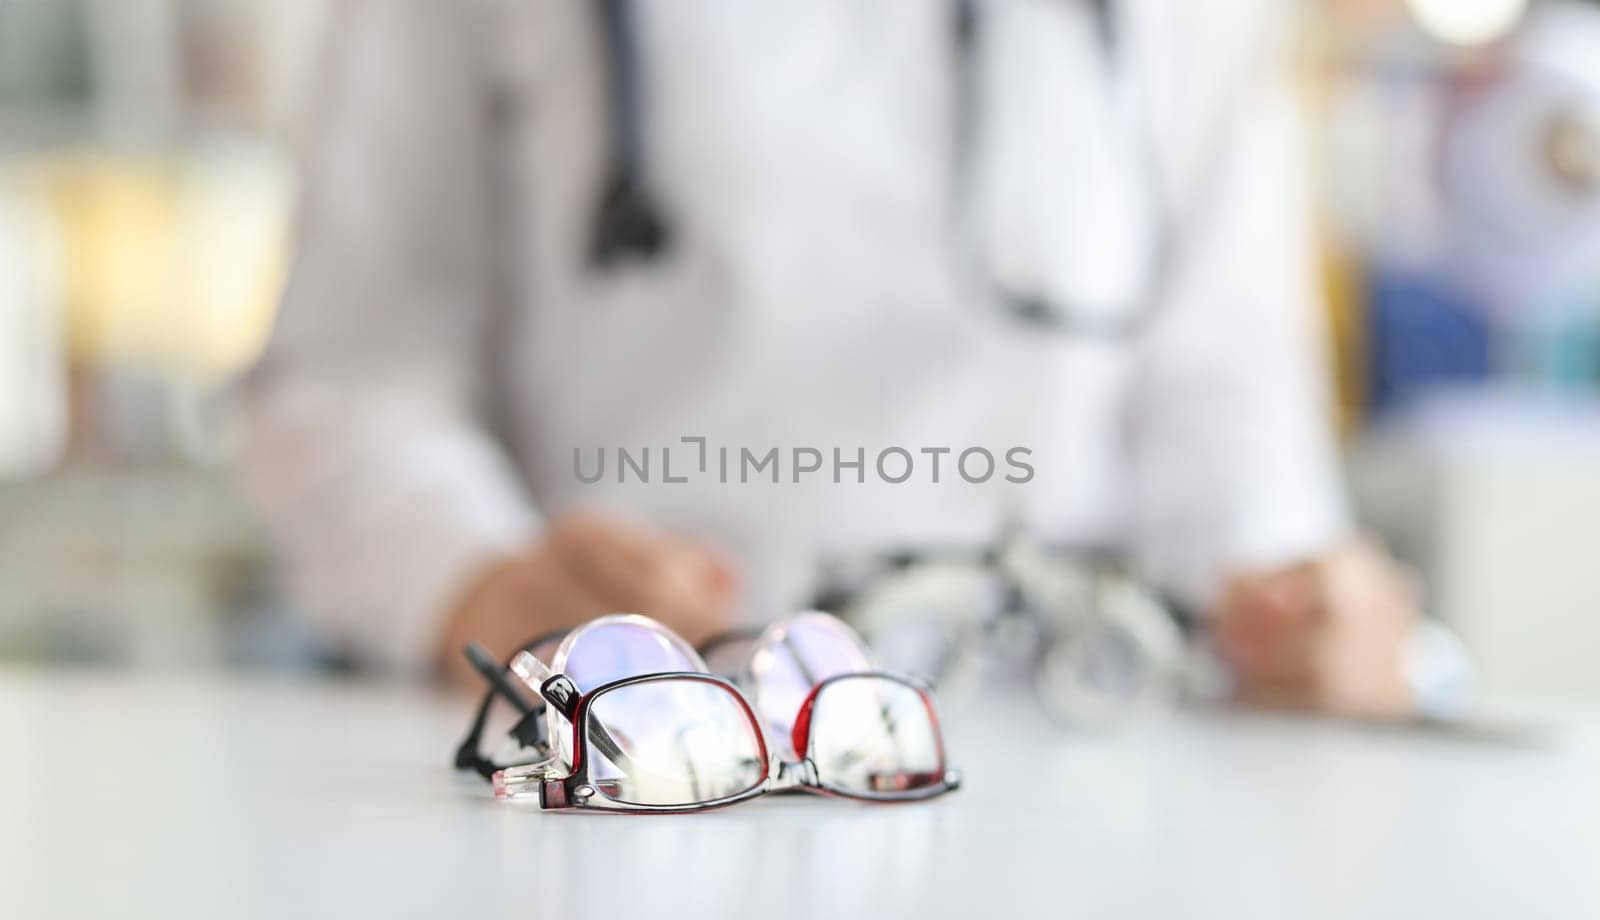 Ophthalmologist sits in background with various glasses for fitting lenses in frame. Treatment of farsightedness myopia and astigmatism